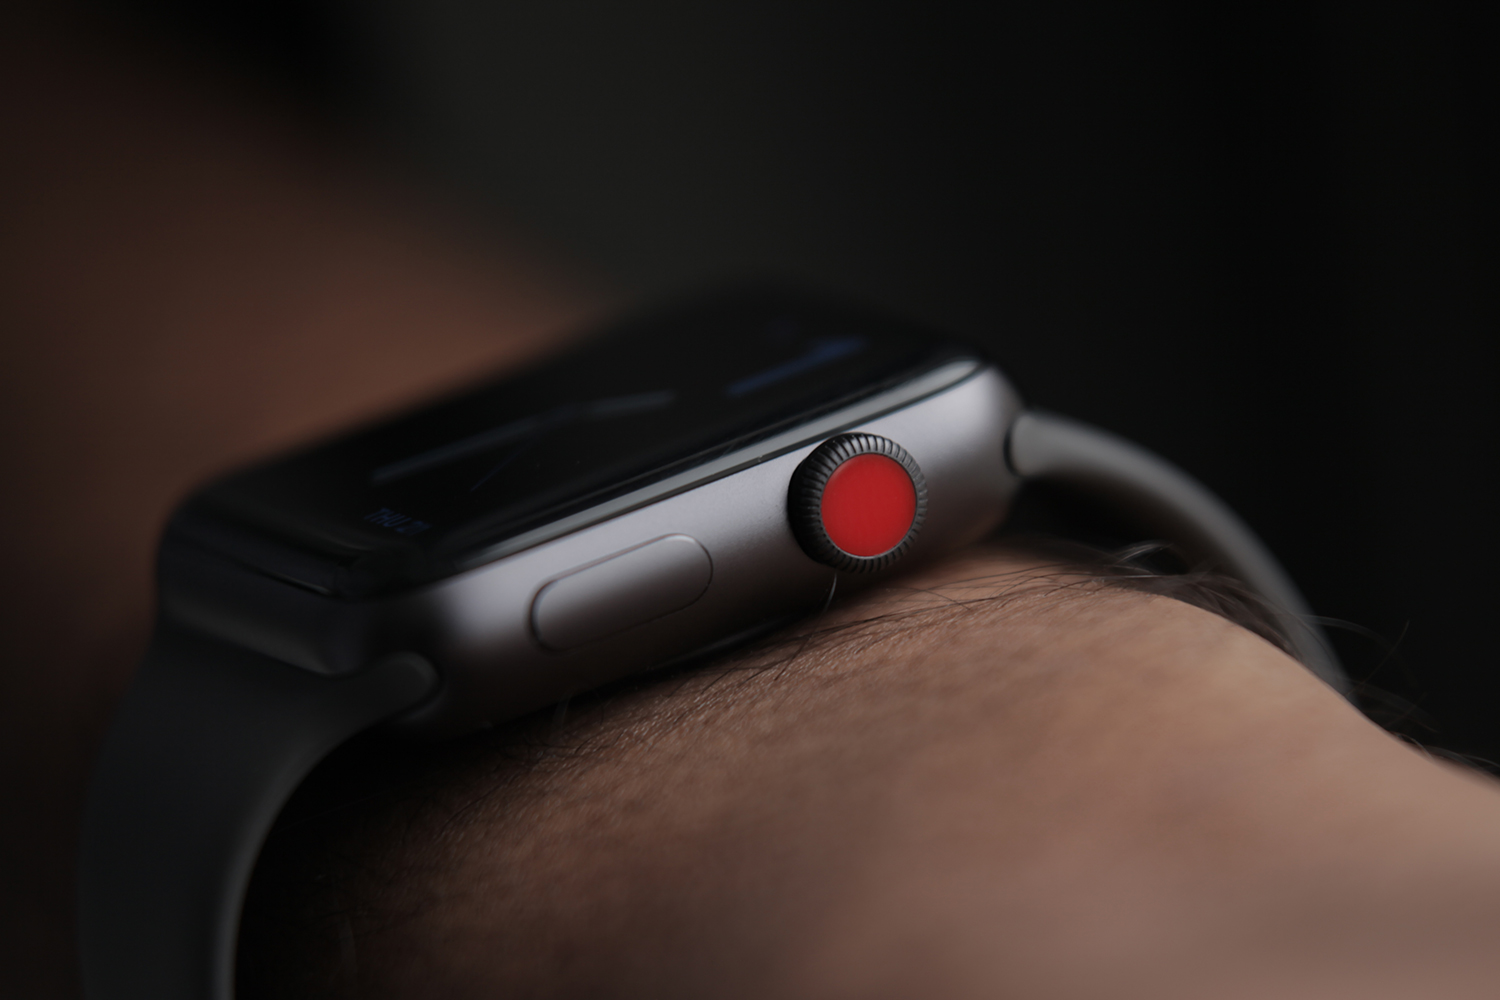 Review: Apple Watch Series 3 with cellular further establishes an emerging  computing platform